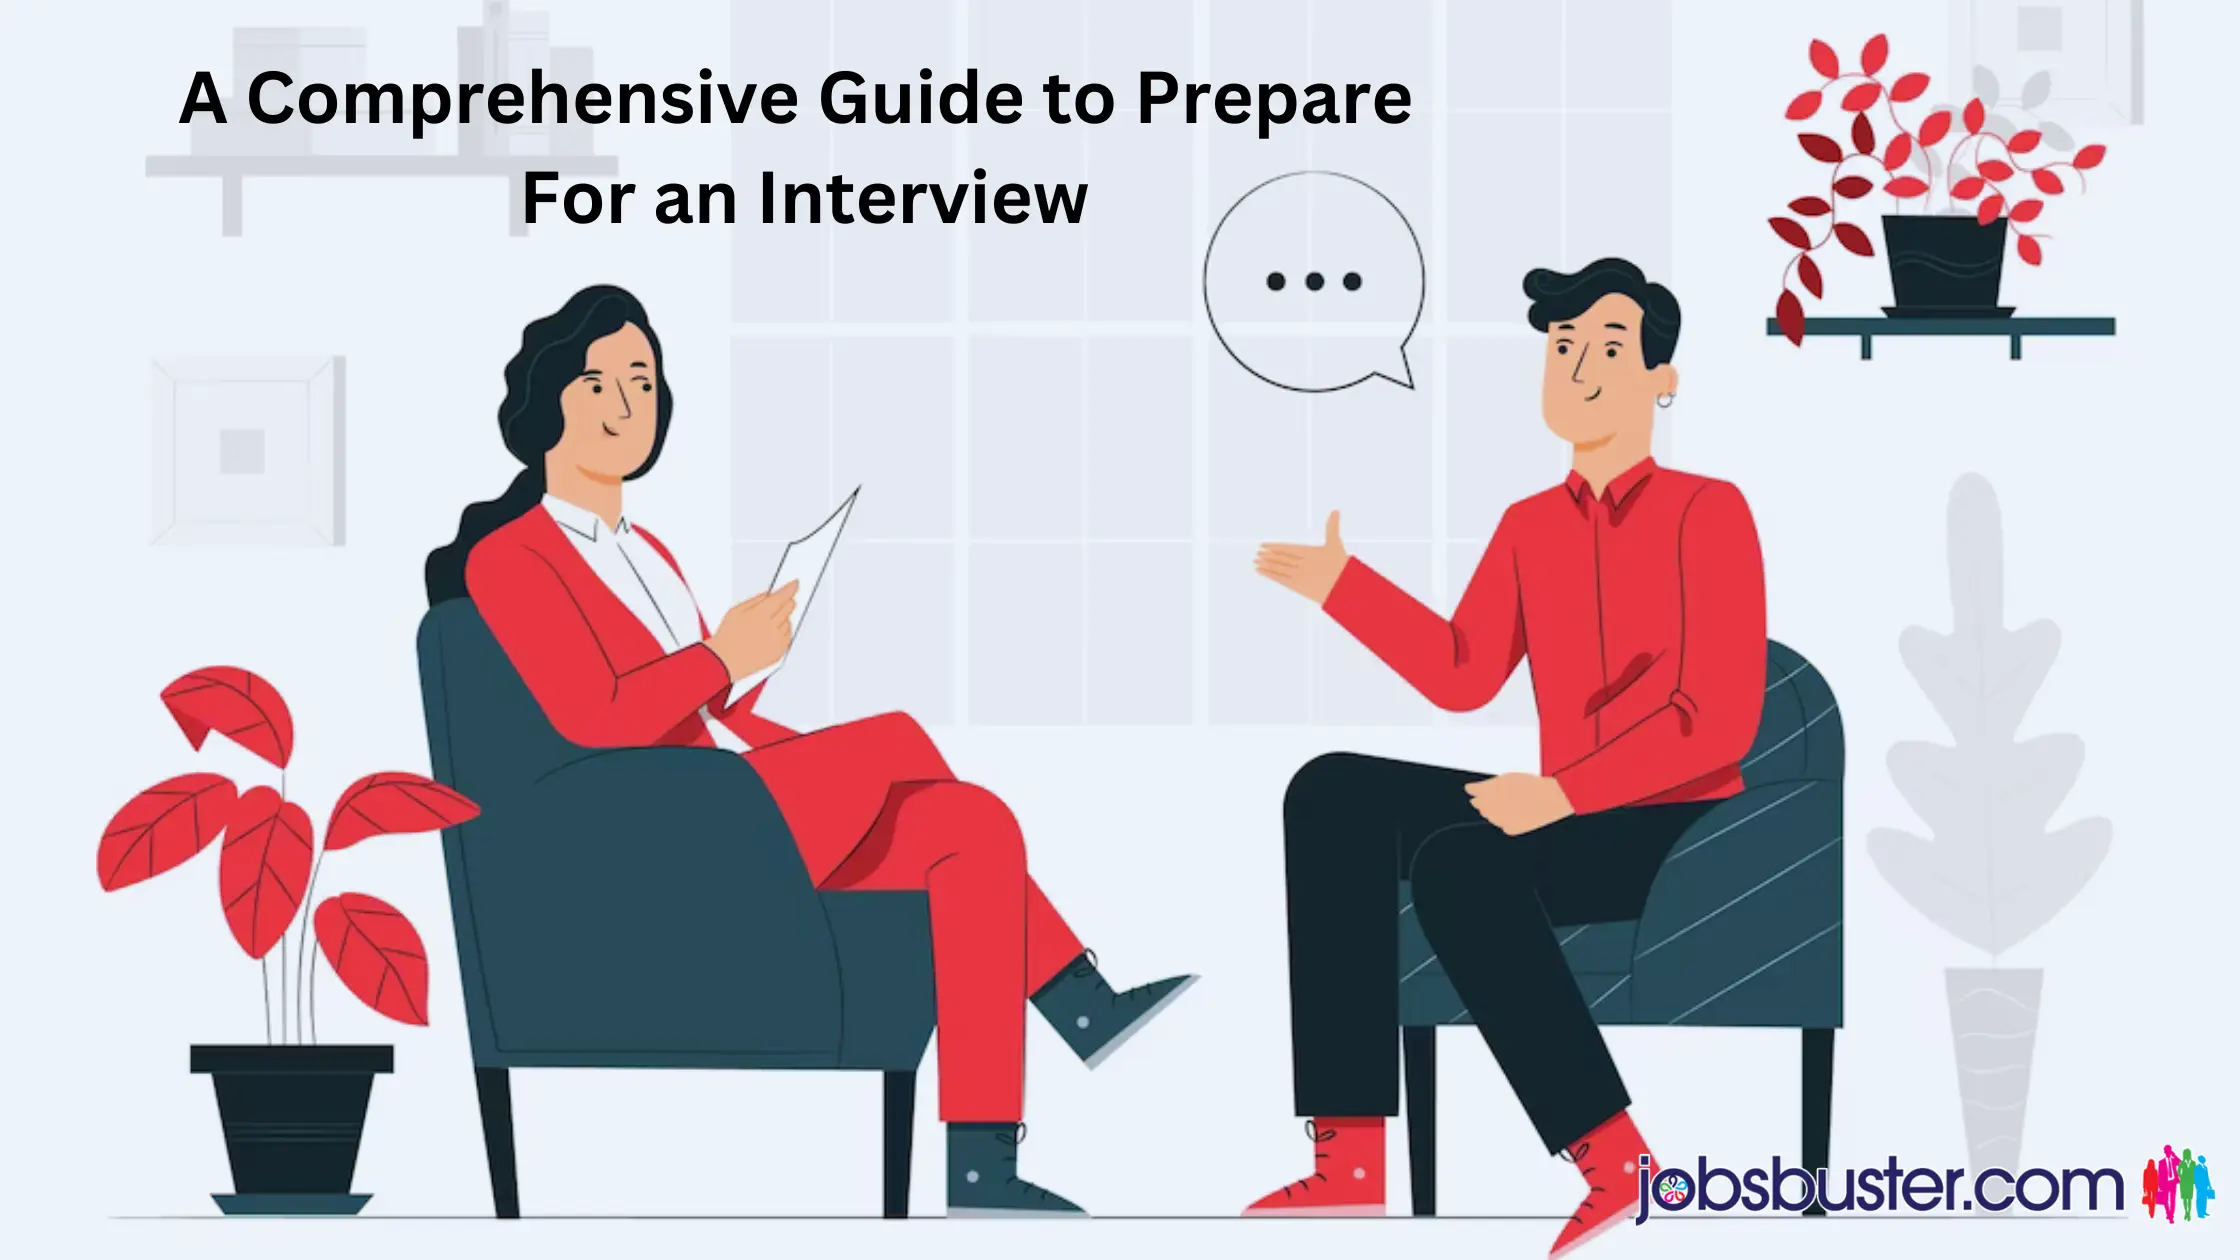 A Comprehensive Guide to Prepare For an Interview